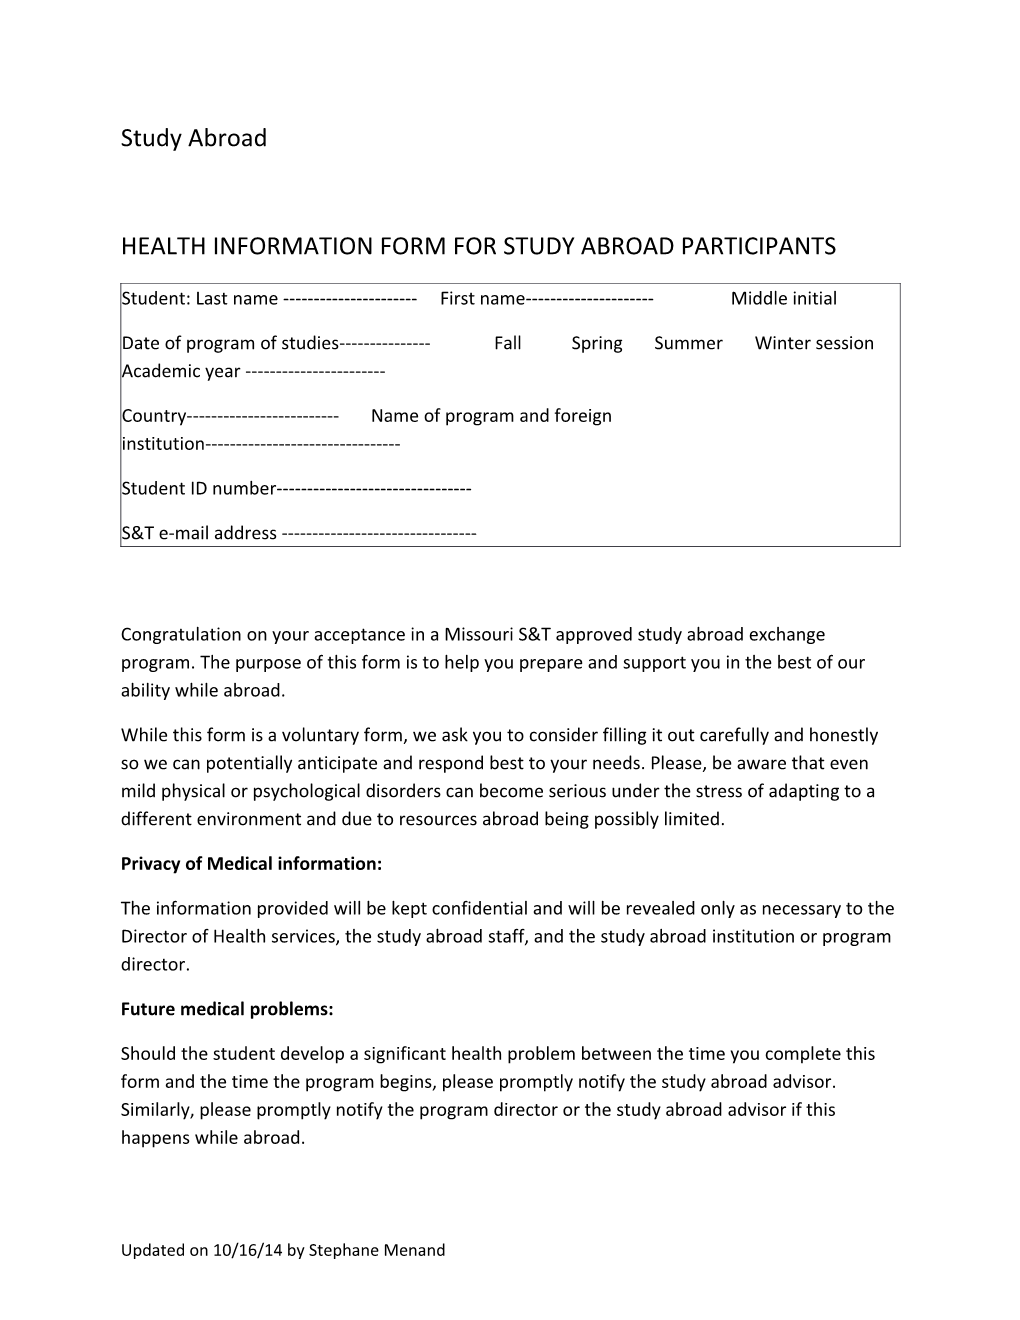 Health Information Form for Study Abroad Participants